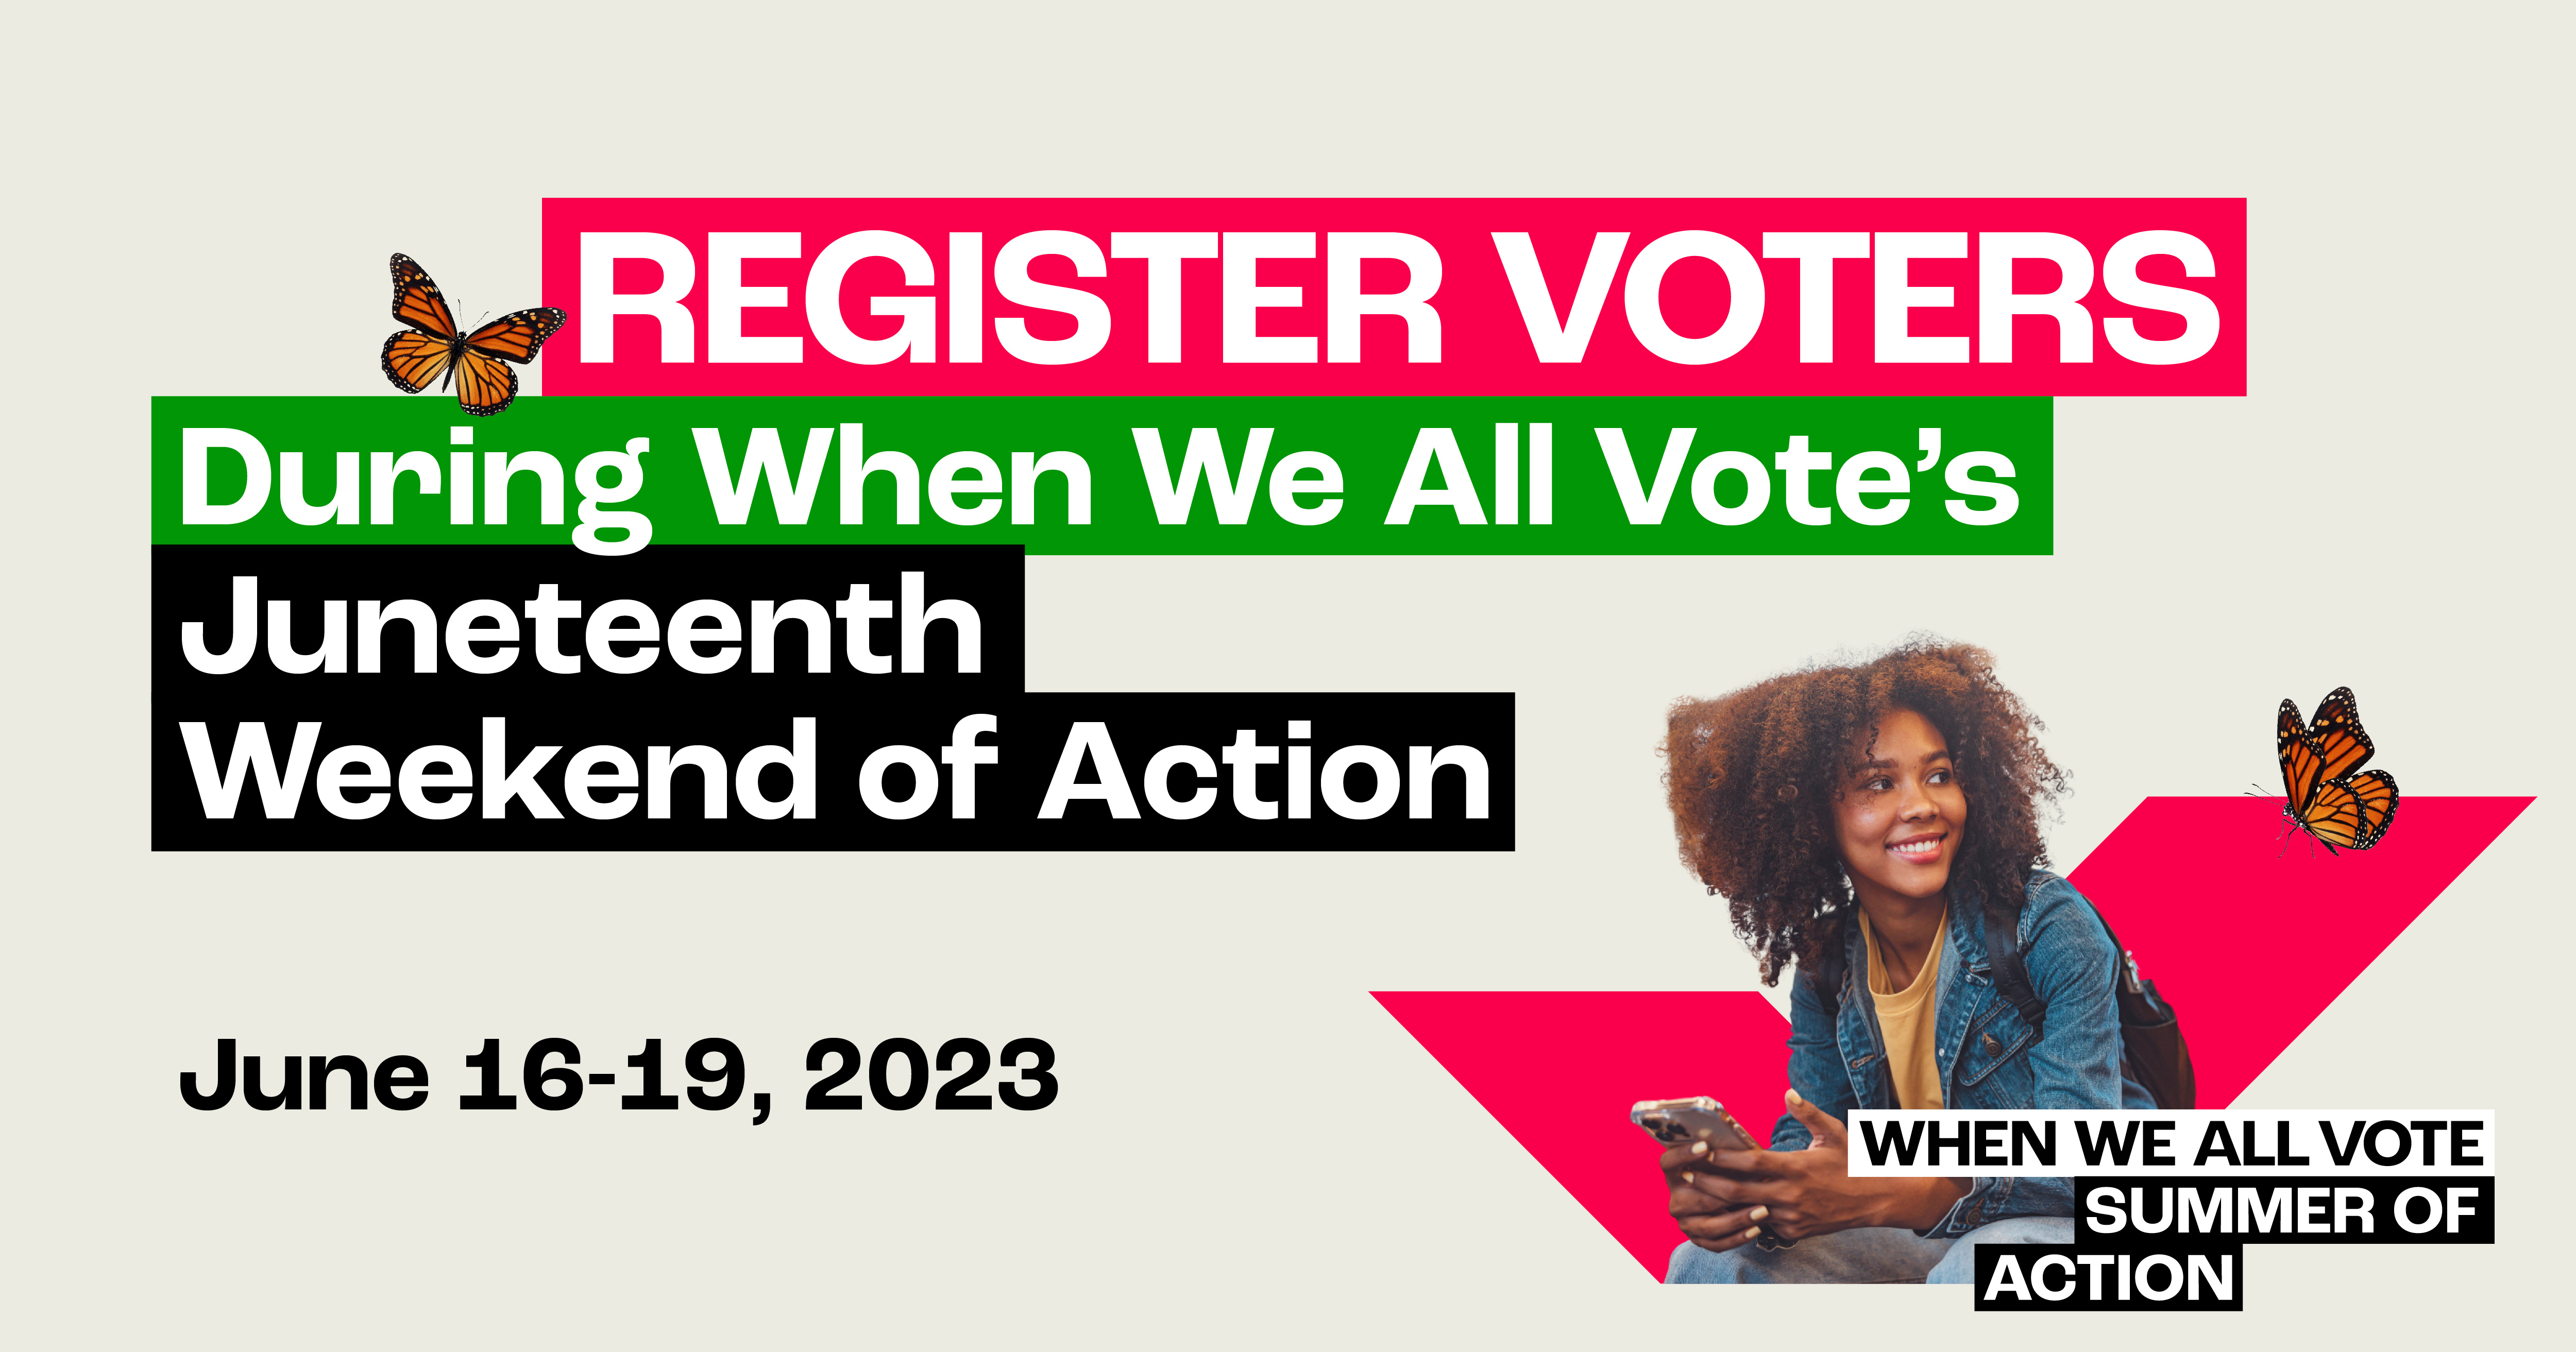 When We All Vote | Juneteenth overseas voter registration education event